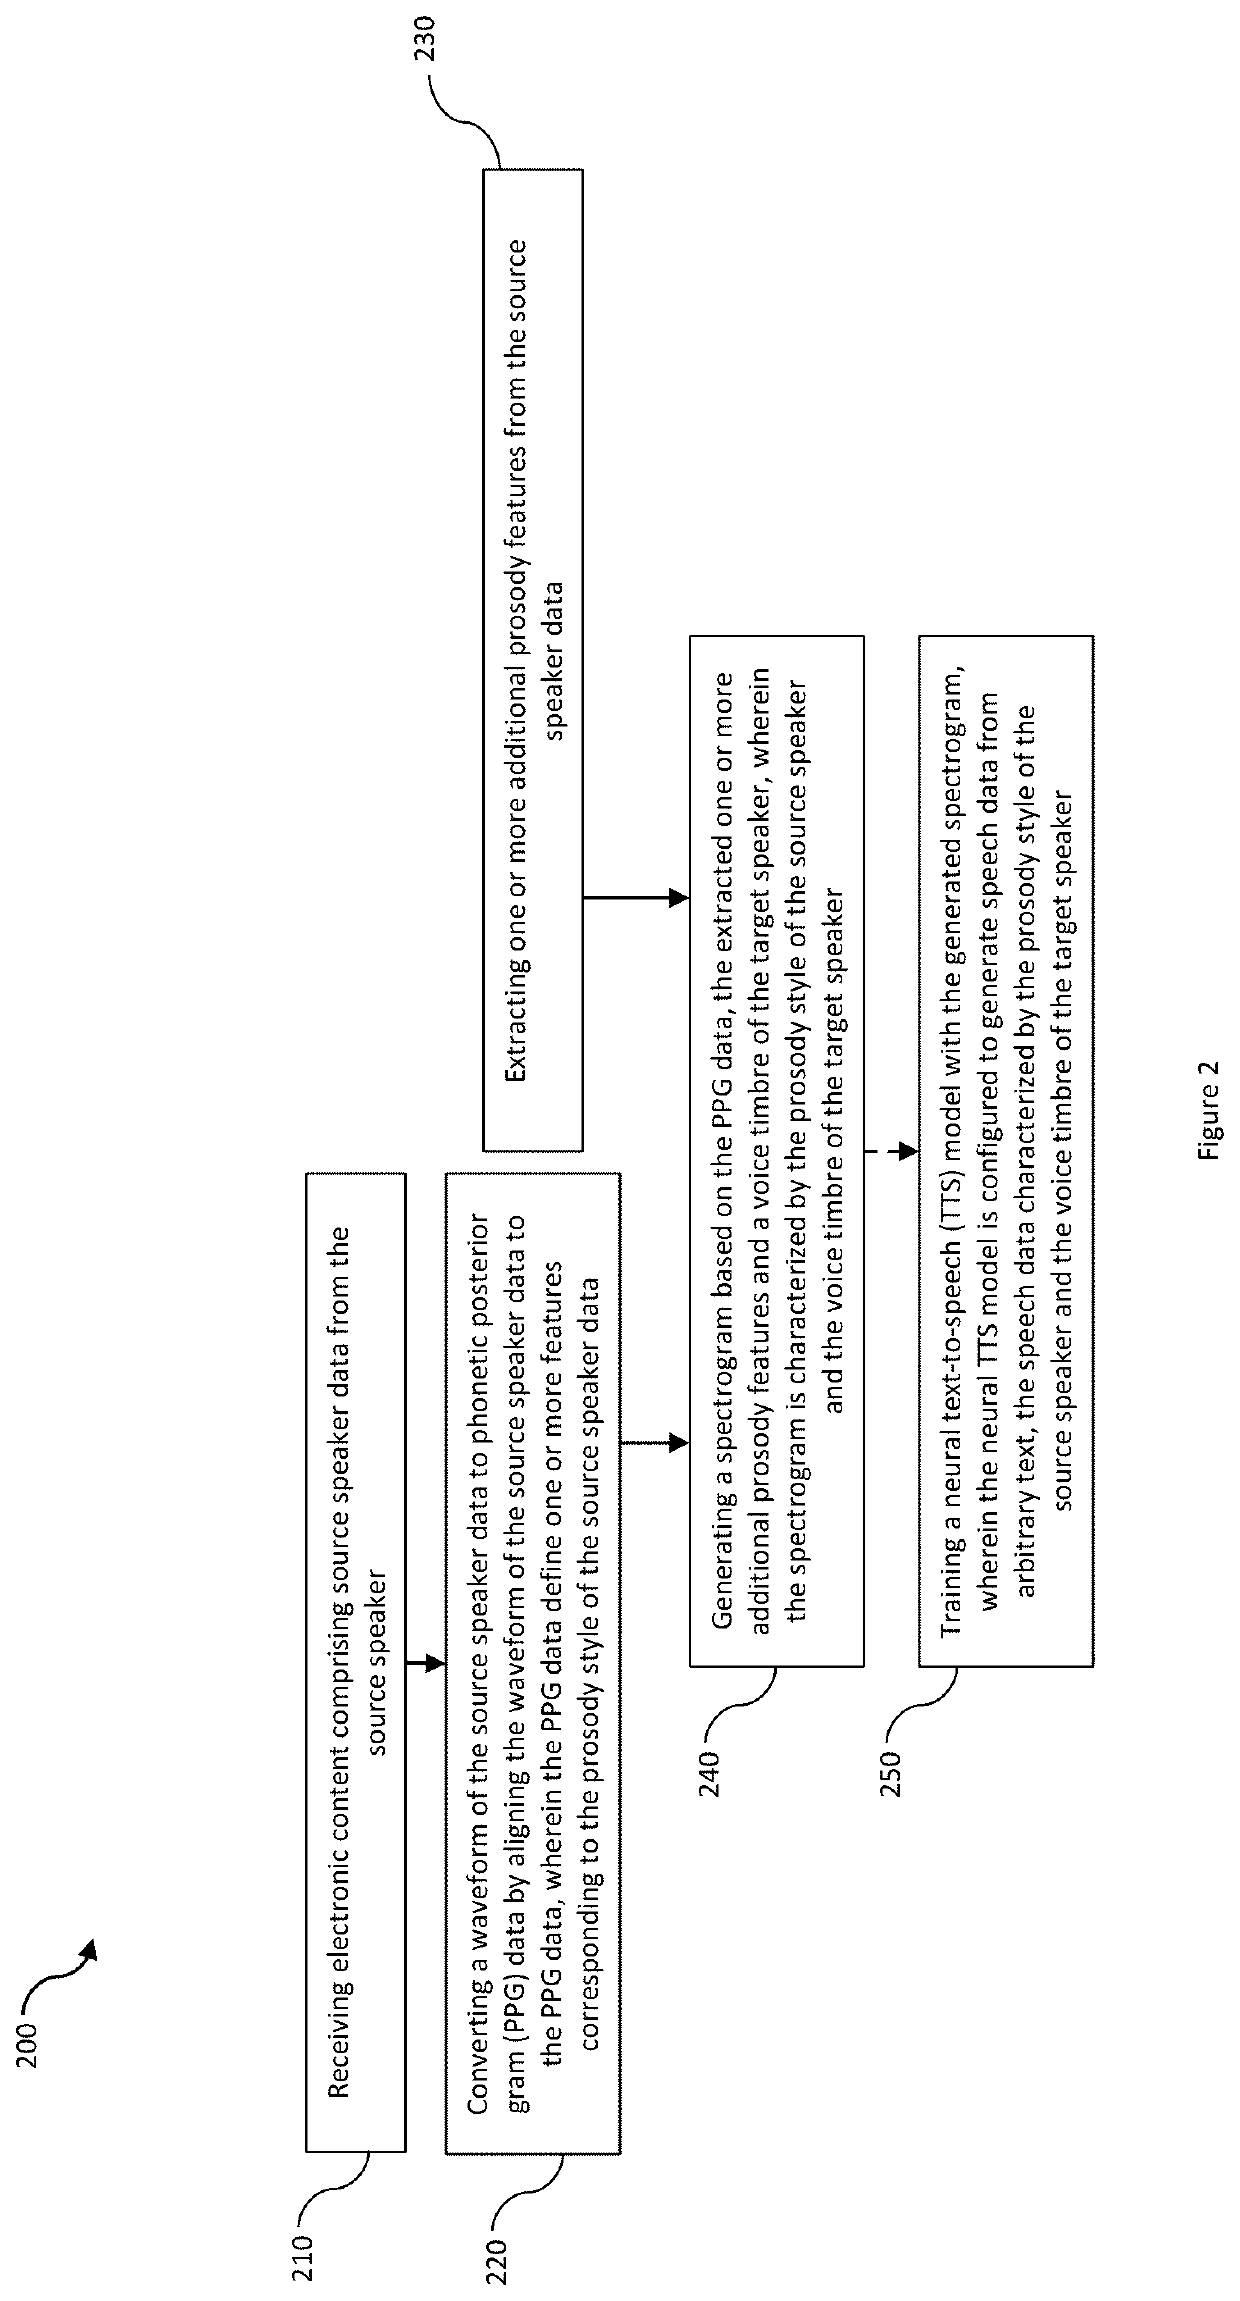 System and method for cross-speaker style transfer in text-to-speech and training data generation